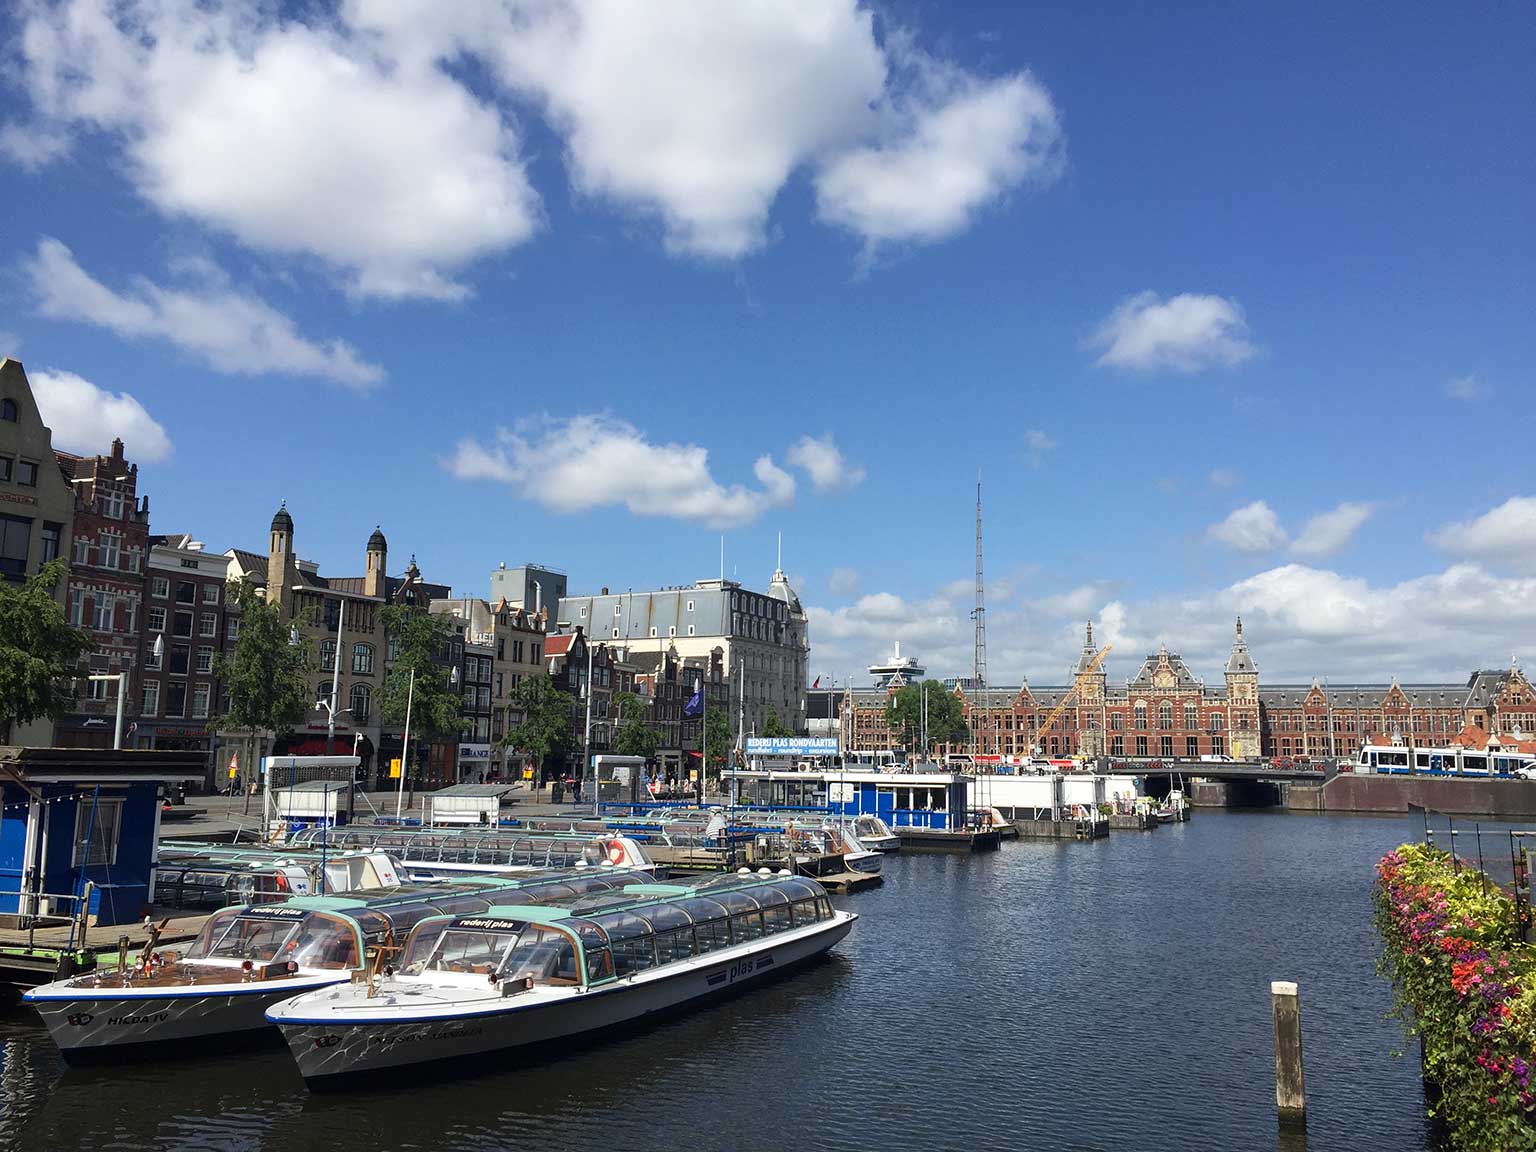 Tour boats in the water of Damrak, Amsterdam, seen from Oudebrugsteeg towards Central Station